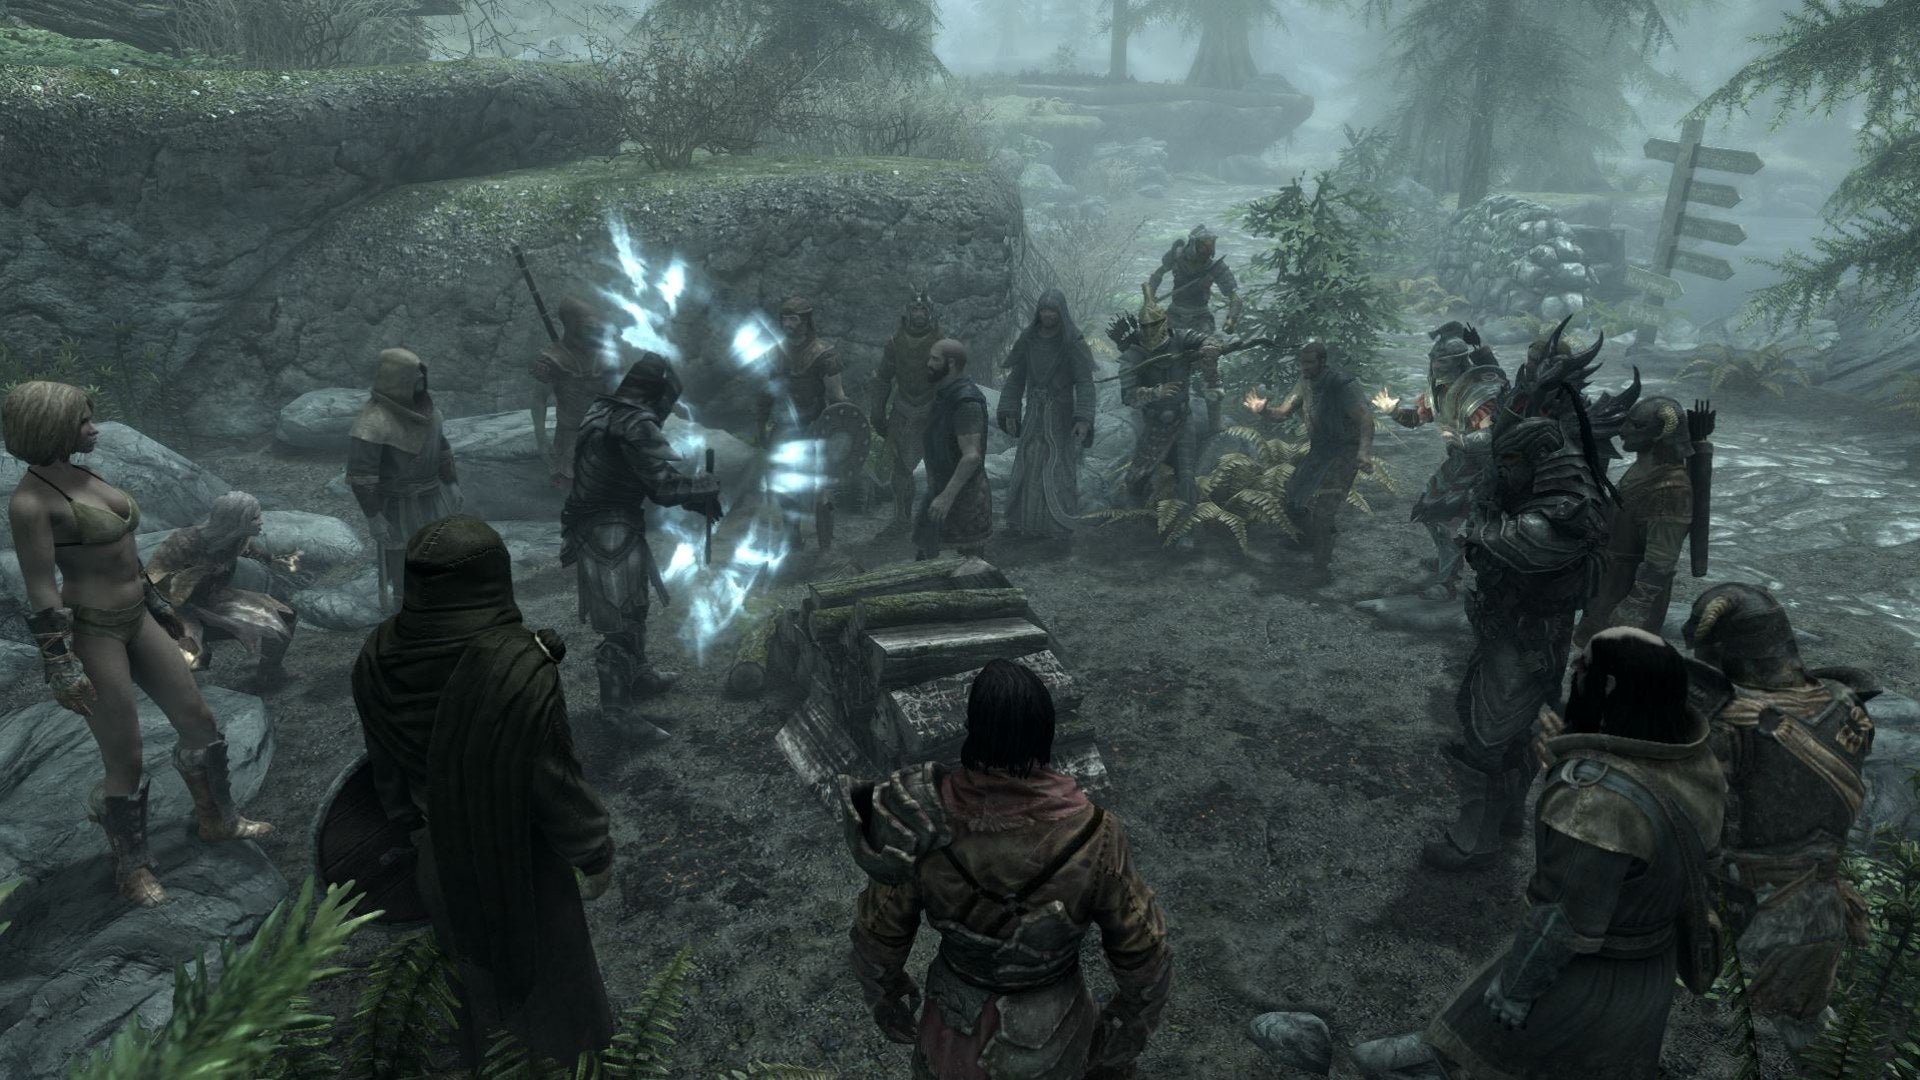 Skyrim Together Reborn is a revamped co-op mod for The Elder Scrolls V: Special Edition that launched on July 8th, 2022.